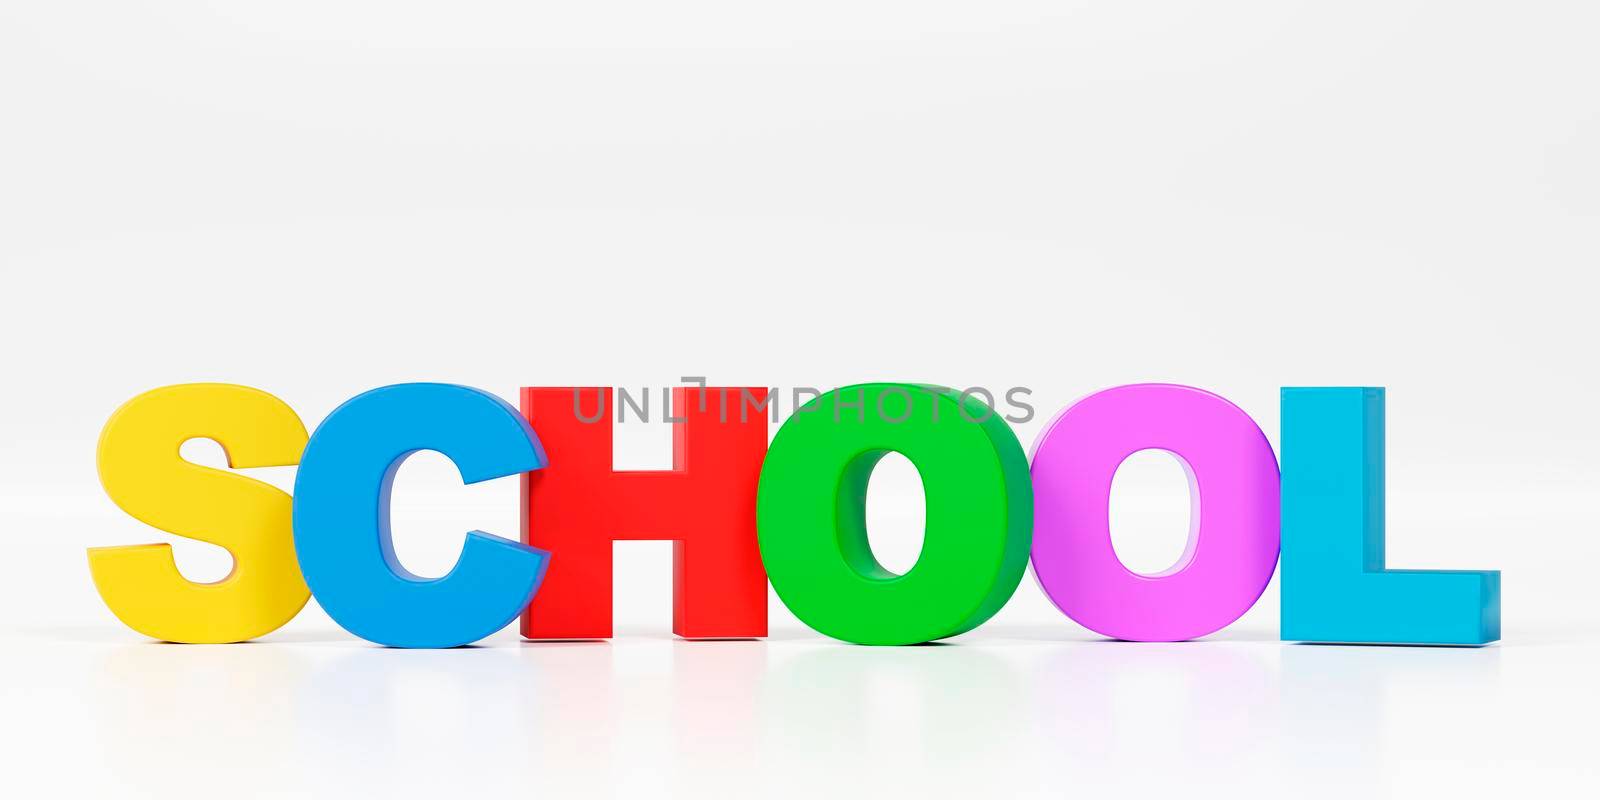 3d "school" text on white background. 3d render